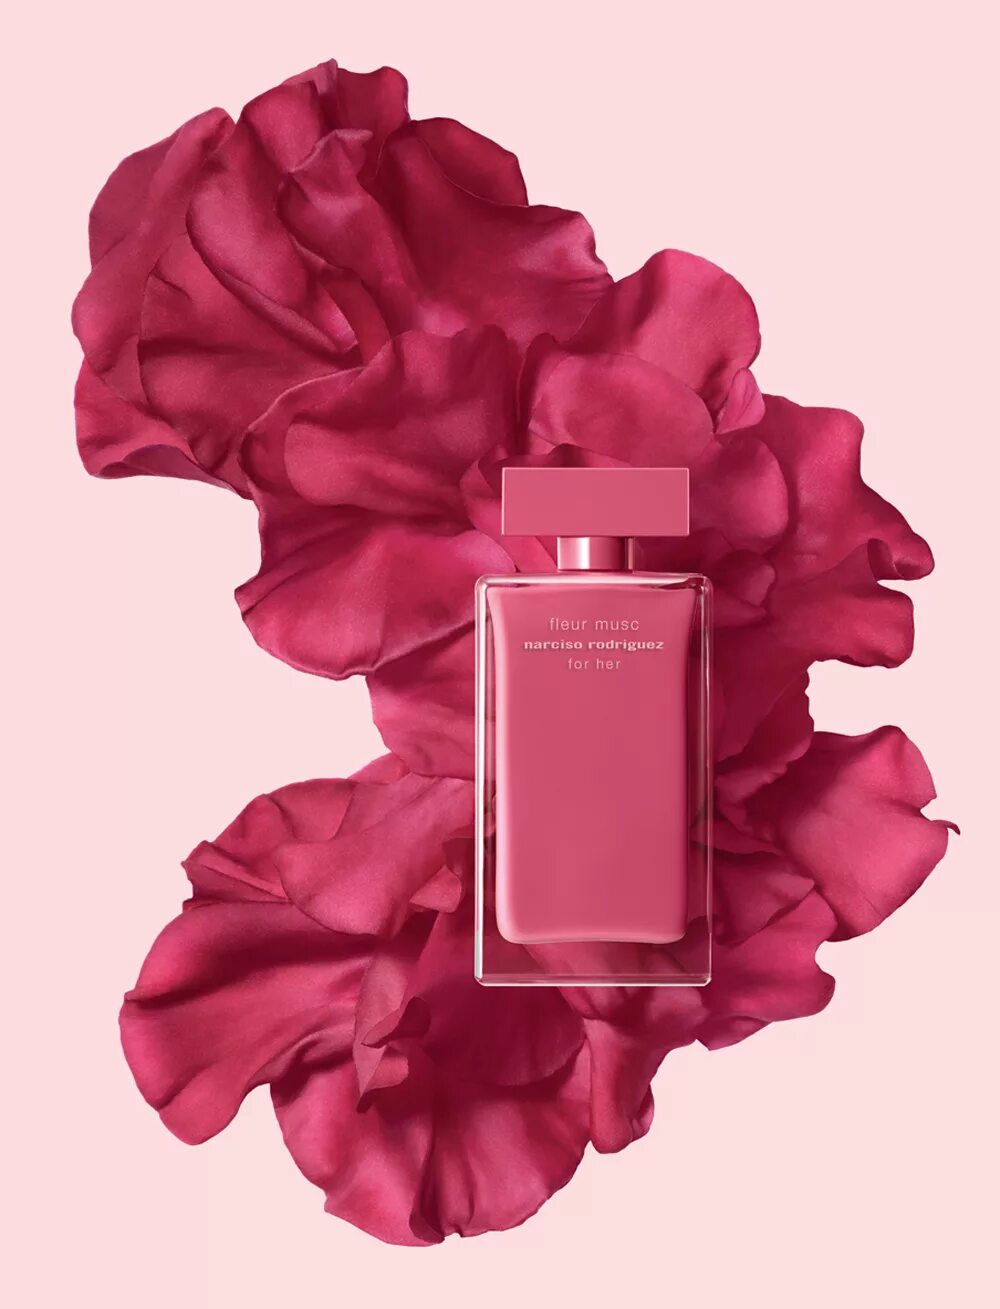 Fleur Musc Narciso Rodriguez for her. Narciso Rodriguez for her fleur Musc EDP 50ml. Narciso Rodriguez for her fleur Musc парфюмерная вода 100 мл. Парфюмерная вода Narciso Rodriguez Narciso Rodriguez for her fleur Musc. Флер муск